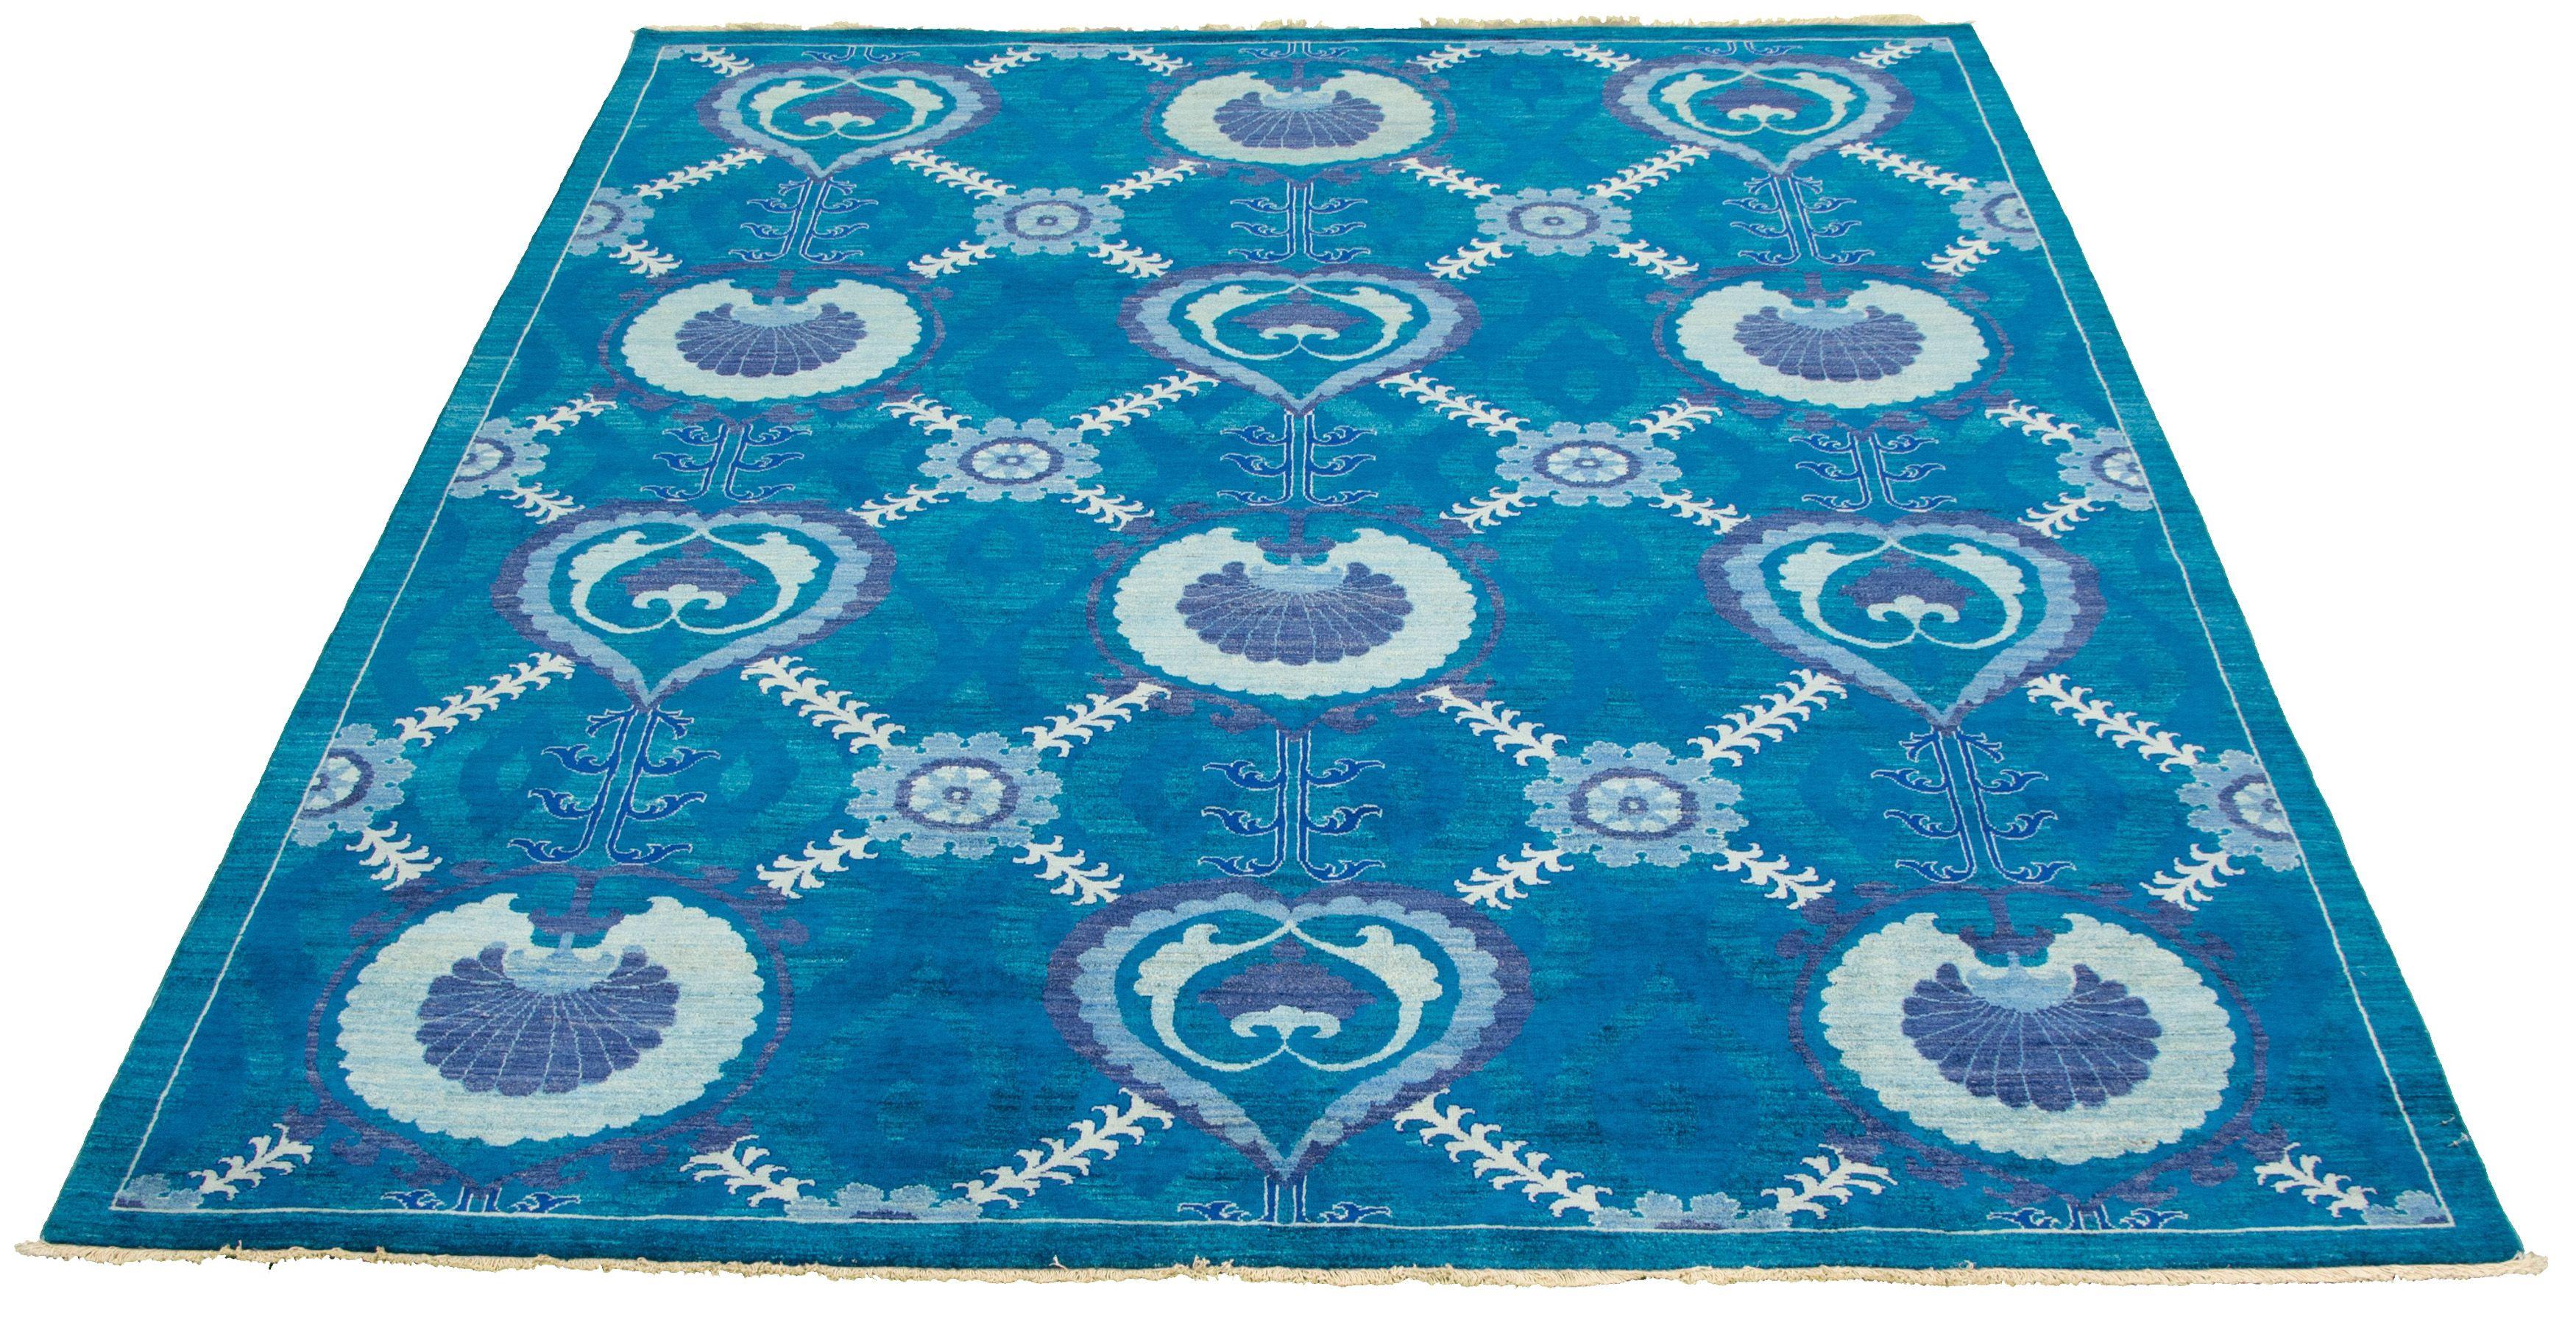 In bright blue aqua hues, this transitional Arts & Crafts Oushak carpet measures 8' x 10' and belongs to the Orley Shabahang Market Collection. Unique with its large scale and repetitive design, this carpet bridges the gap between the traditional